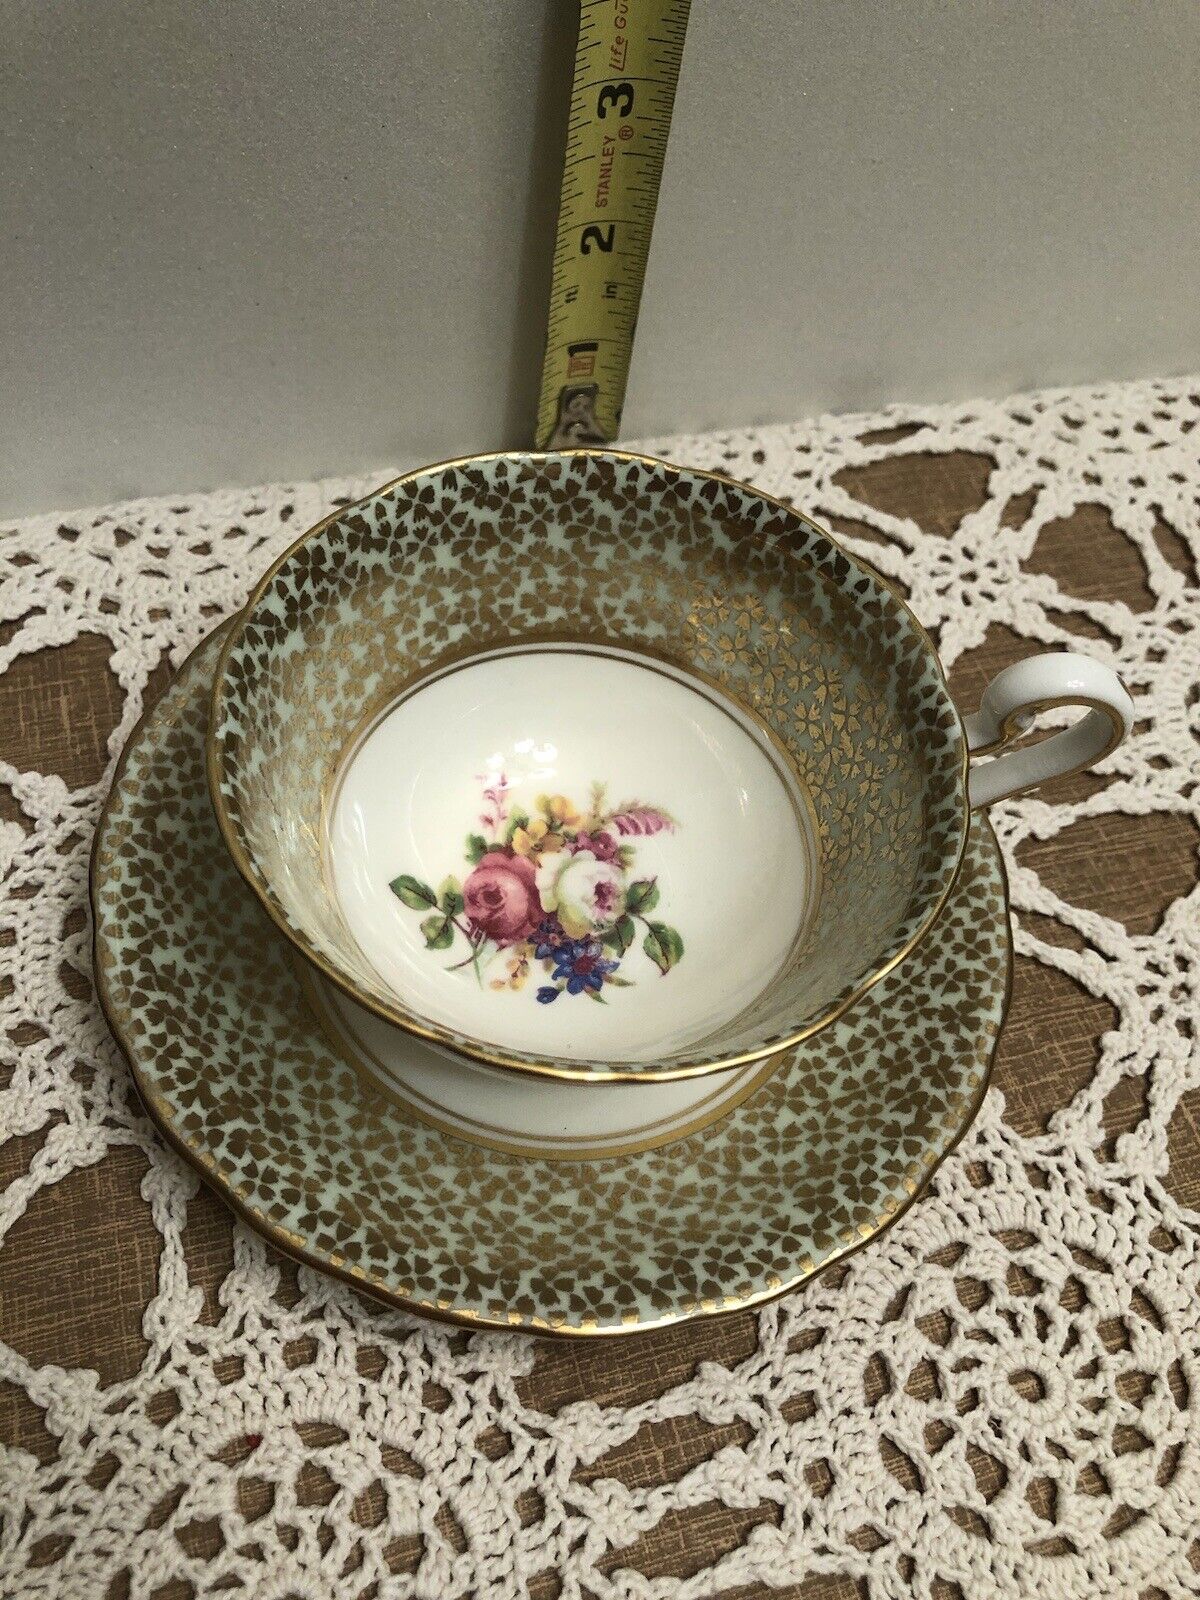 Victoria C&E Bone China Cup And Saucer. “Rose Bouquet”